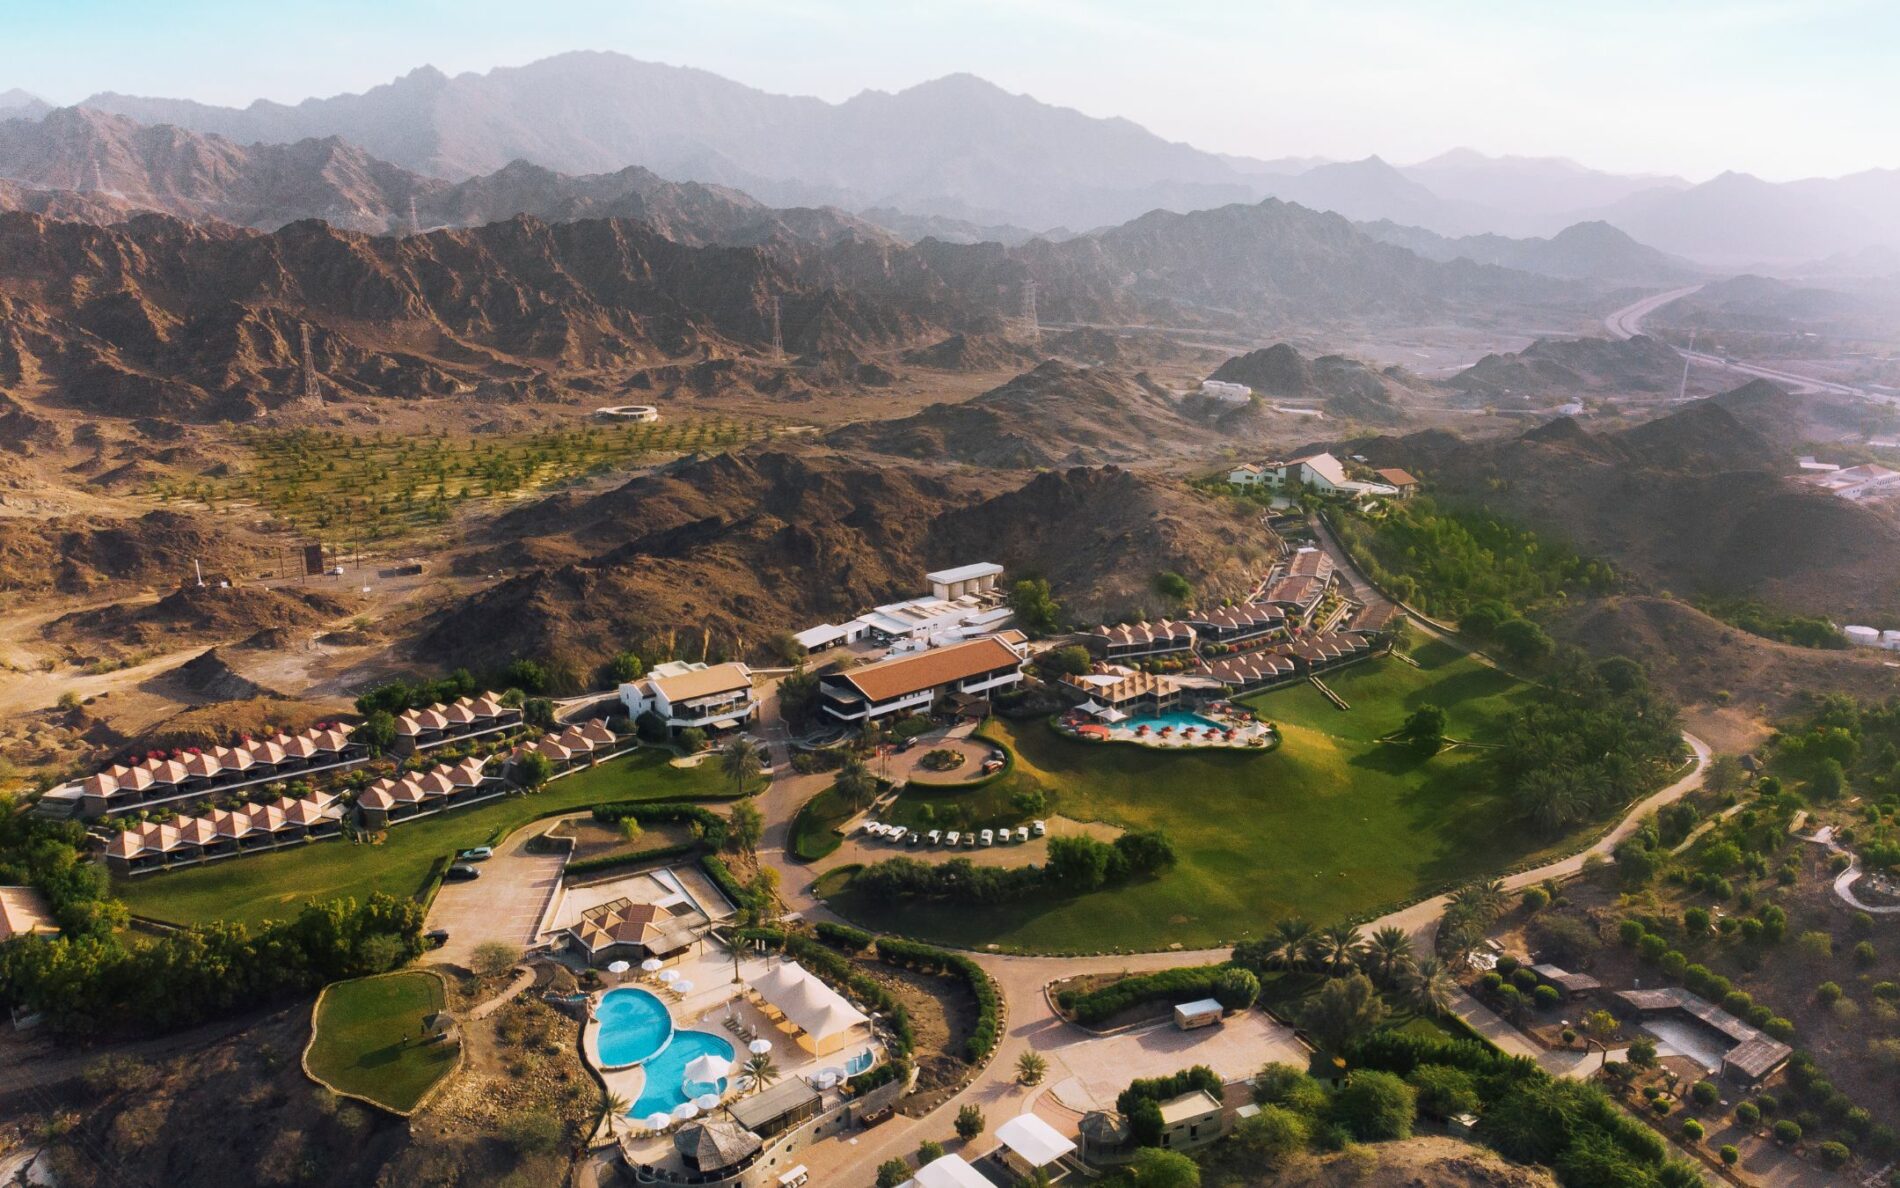 mountains in the UAE with luxury hotel resort with luxury pool. lots of green tress and grass luxury travel lifestyle pr